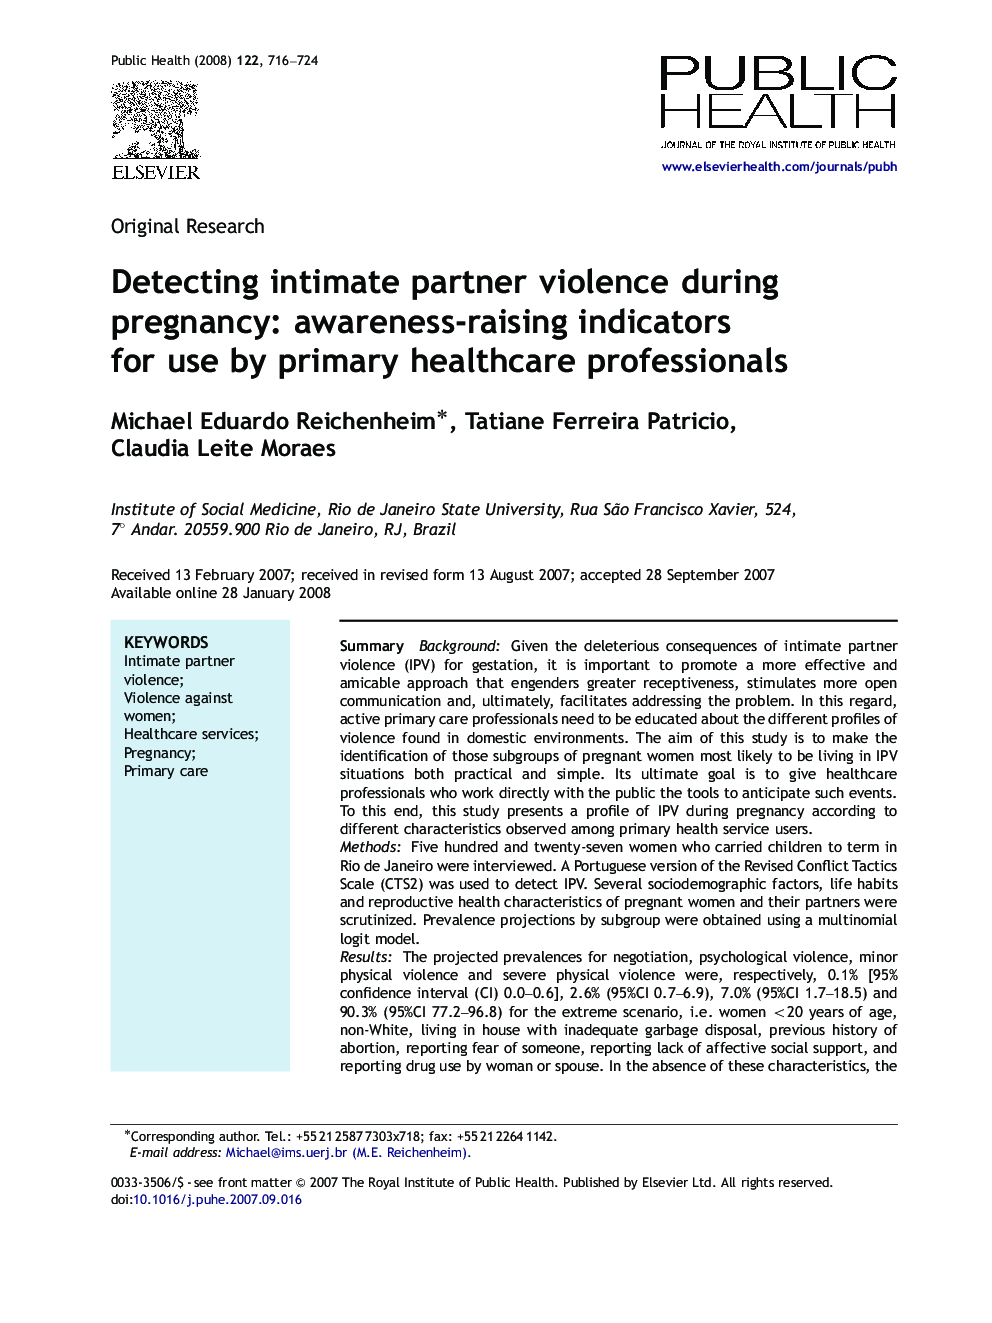 Detecting intimate partner violence during pregnancy: awareness-raising indicators for use by primary healthcare professionals